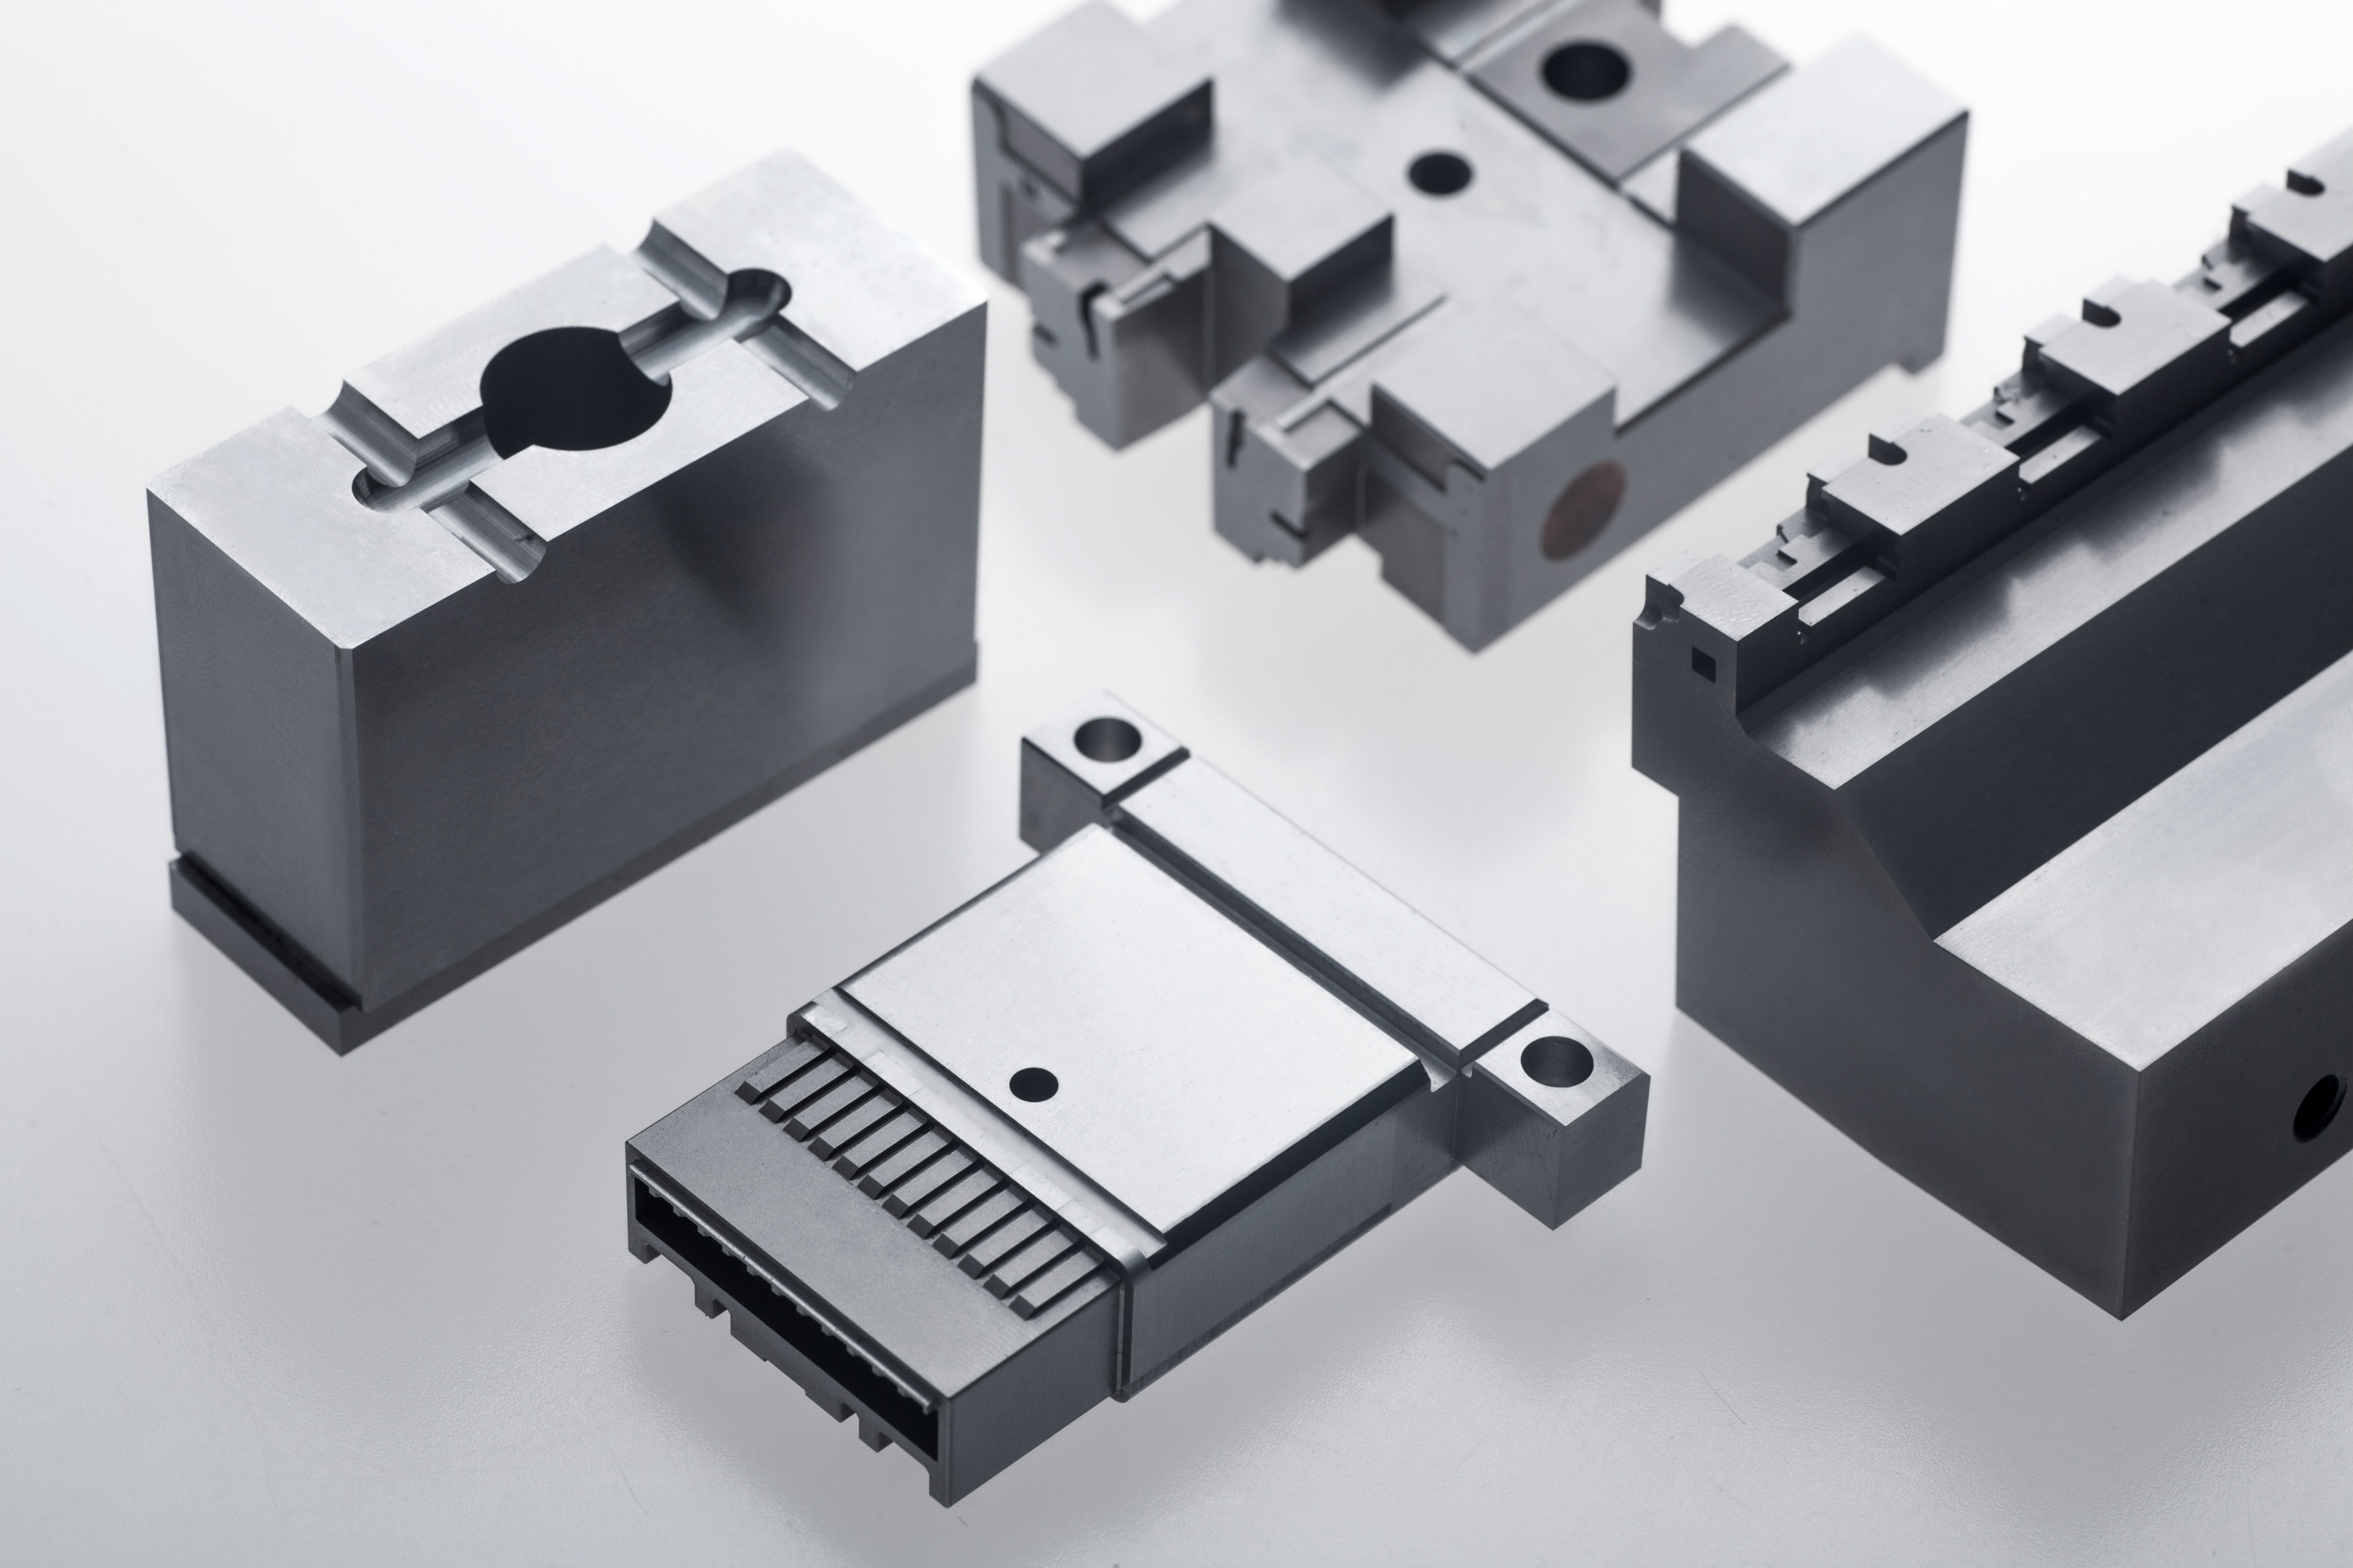 What is the role of stamping die parts in high-end machining